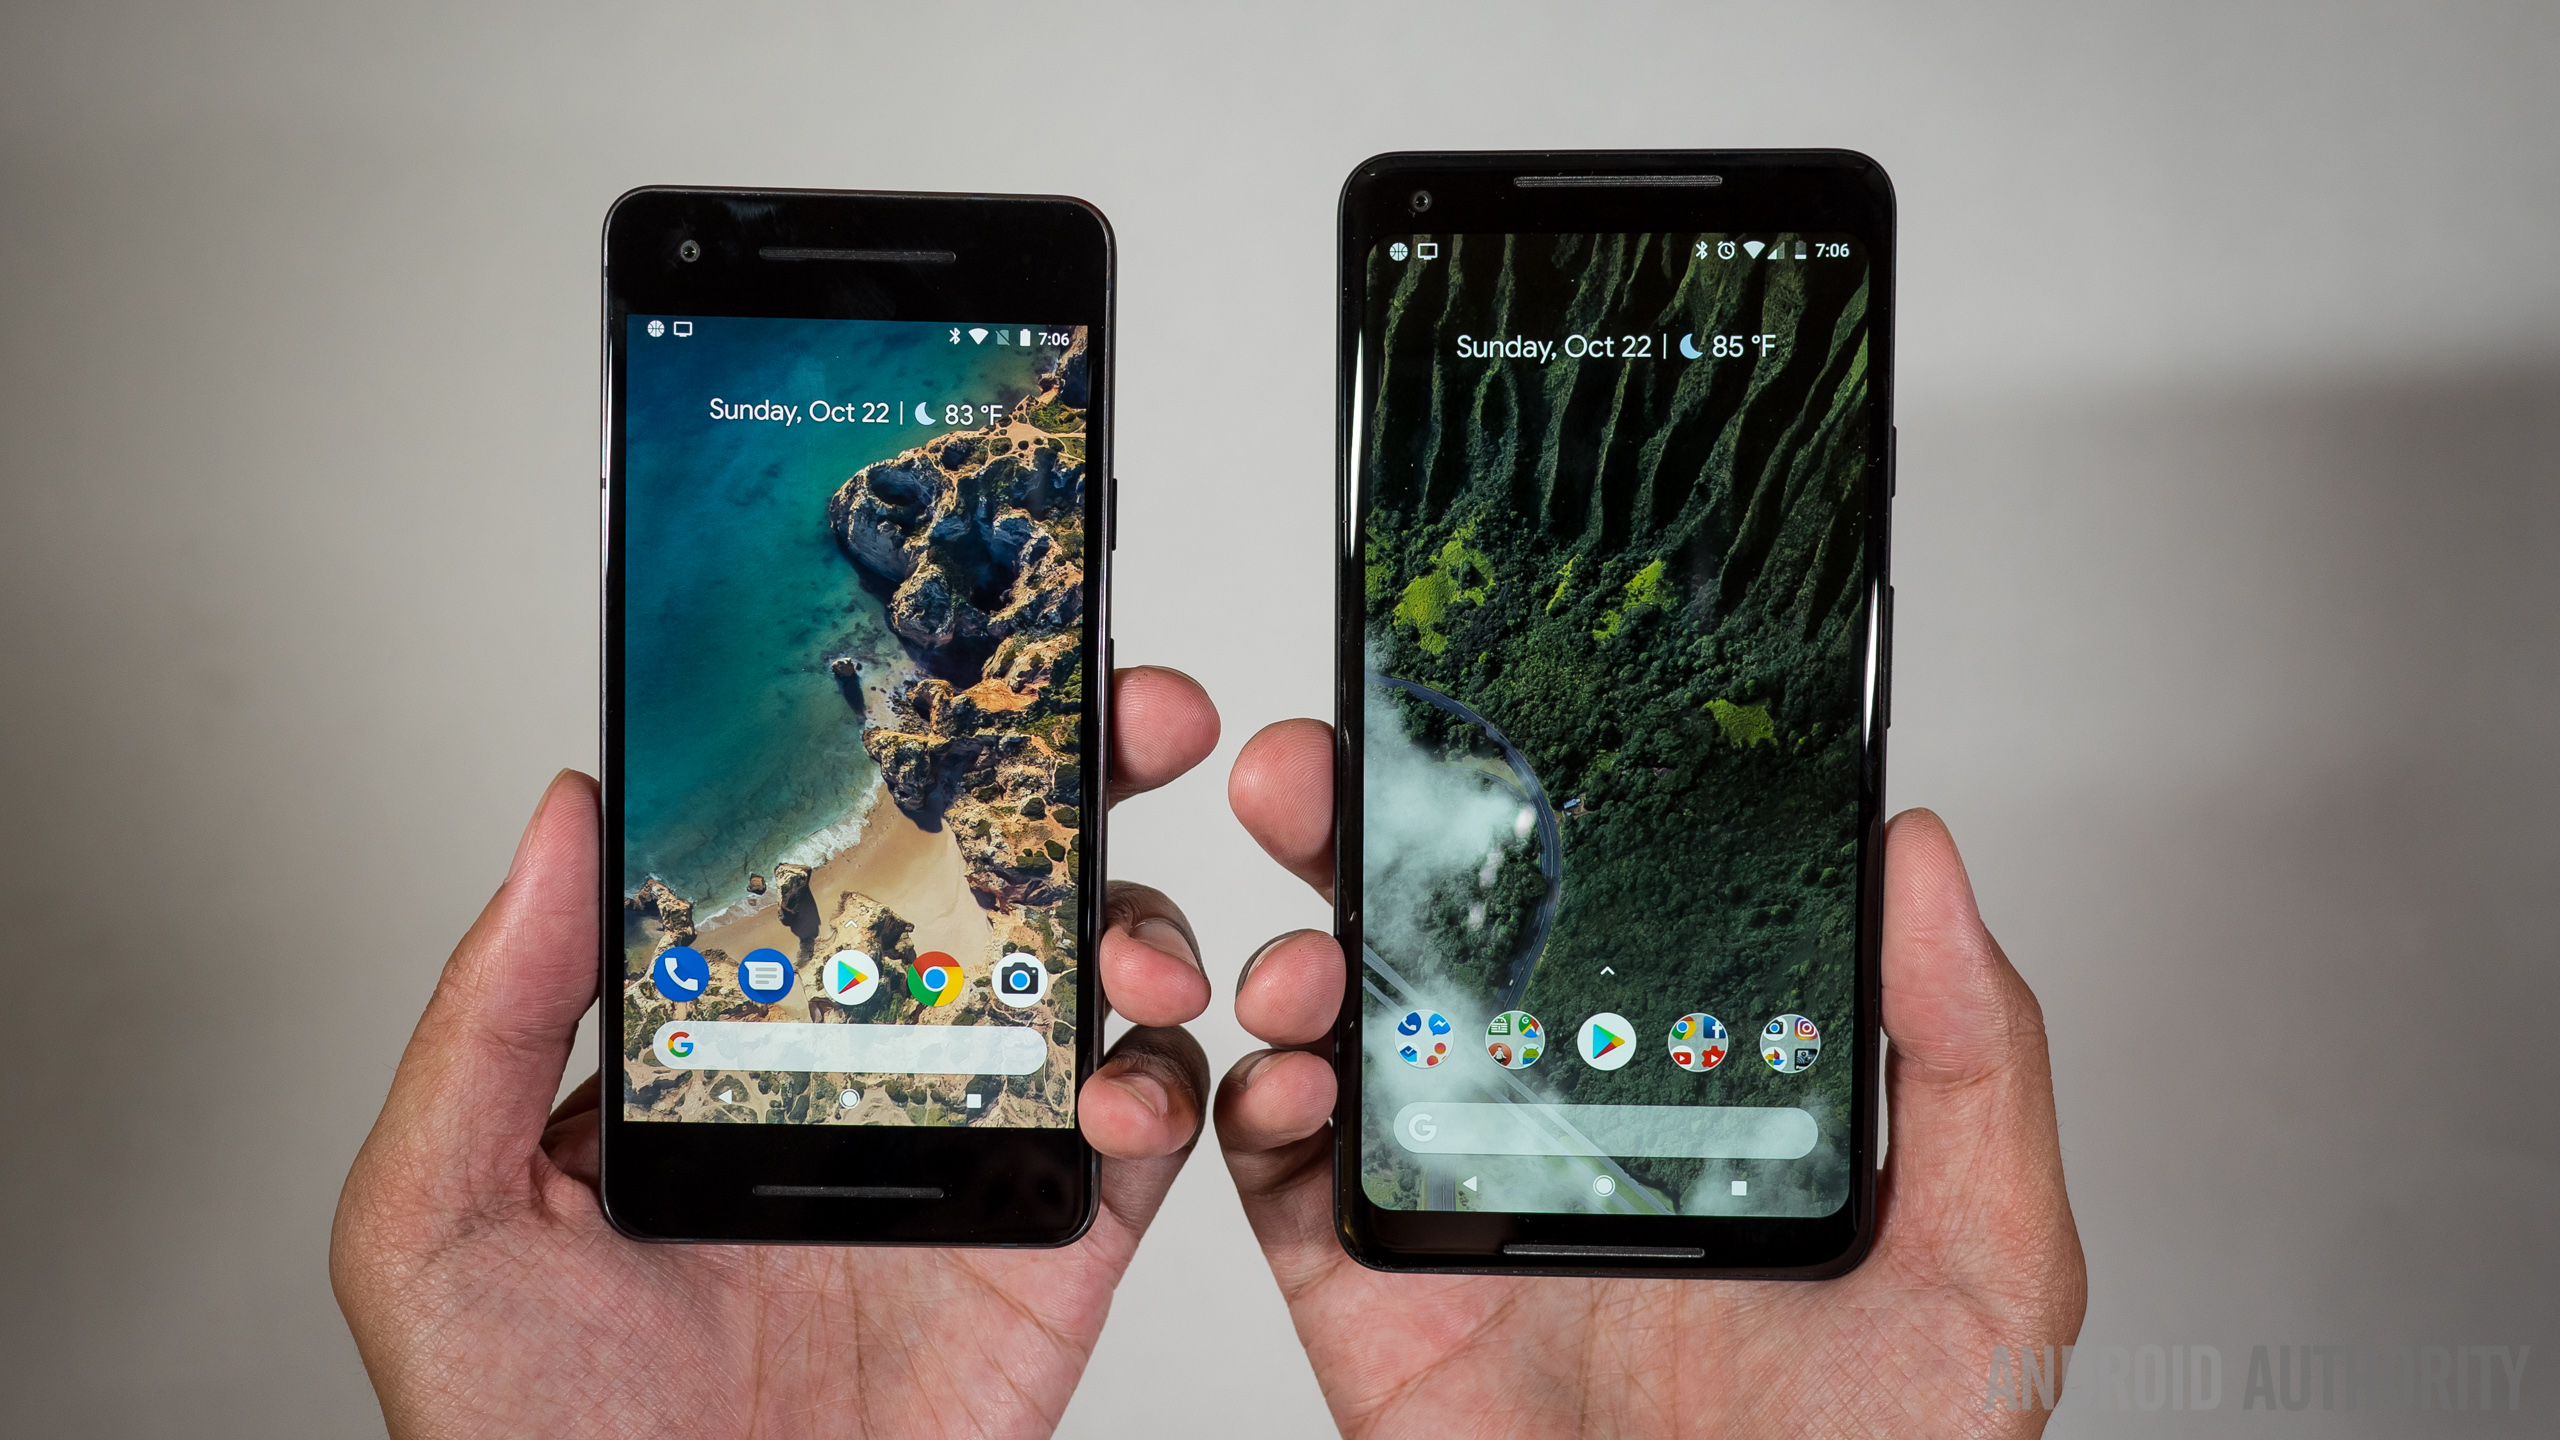 Google Pixel 3 live wallpapers are now available in full resolution online